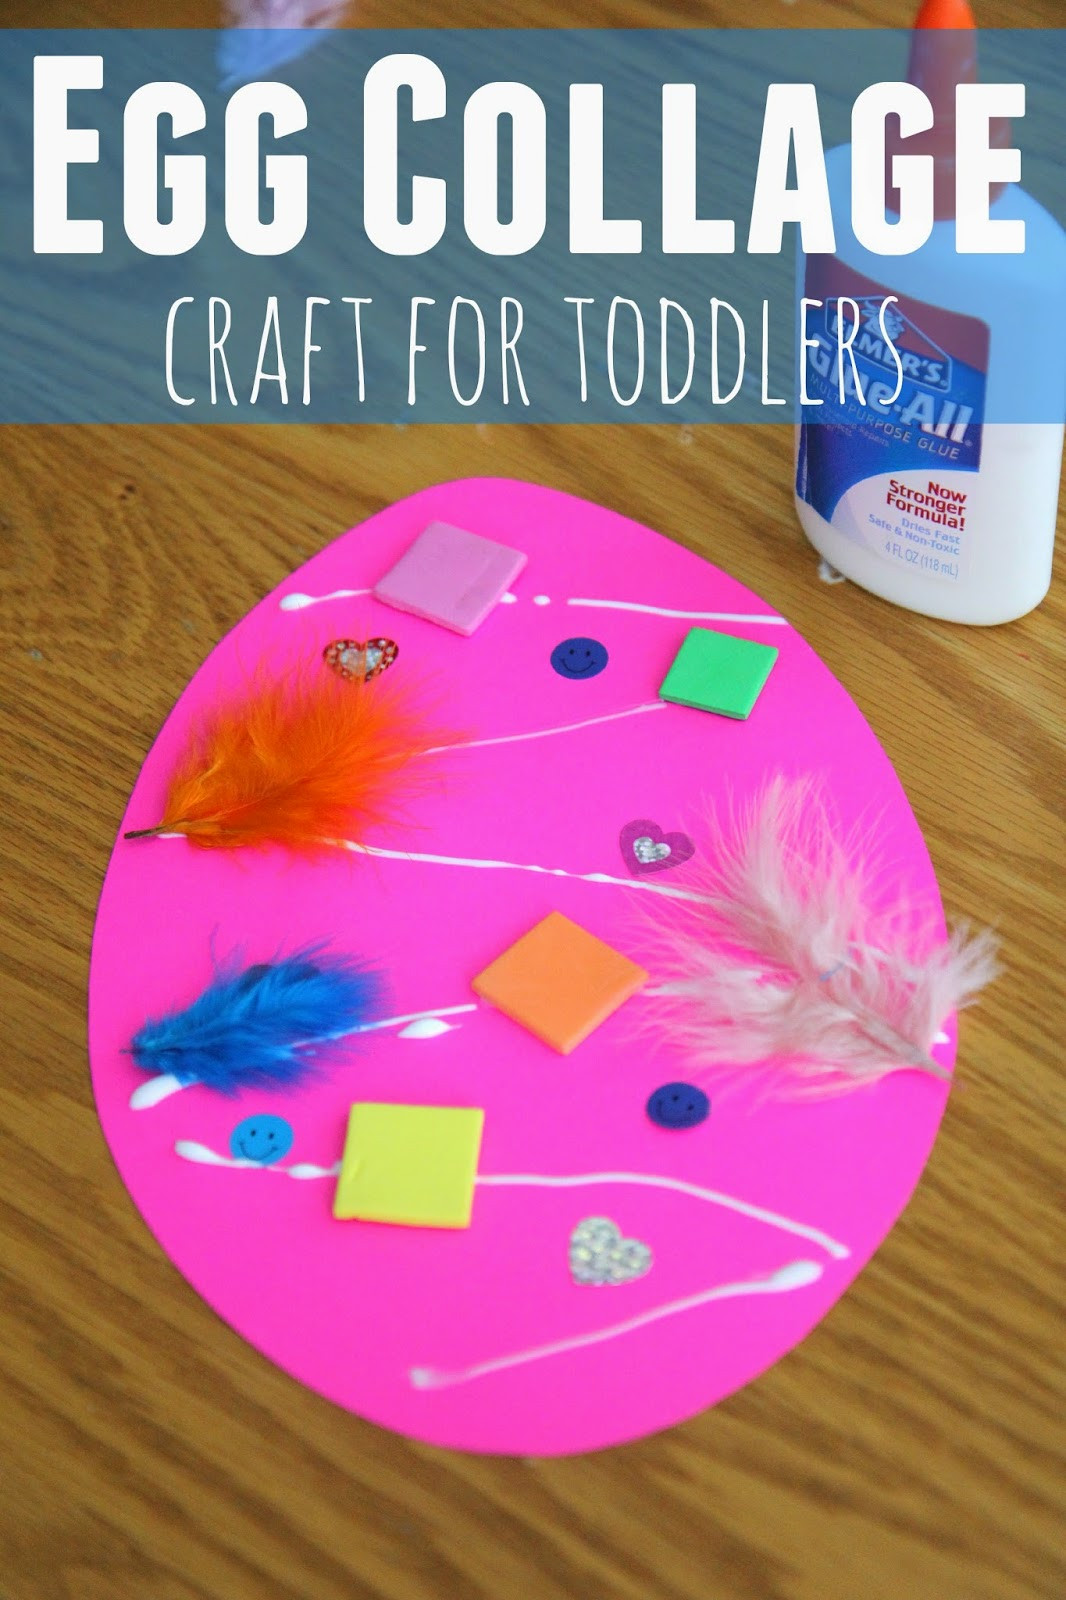 Crafts To Do With Toddlers
 Toddler Approved Easter Egg Collage Craft for Toddlers